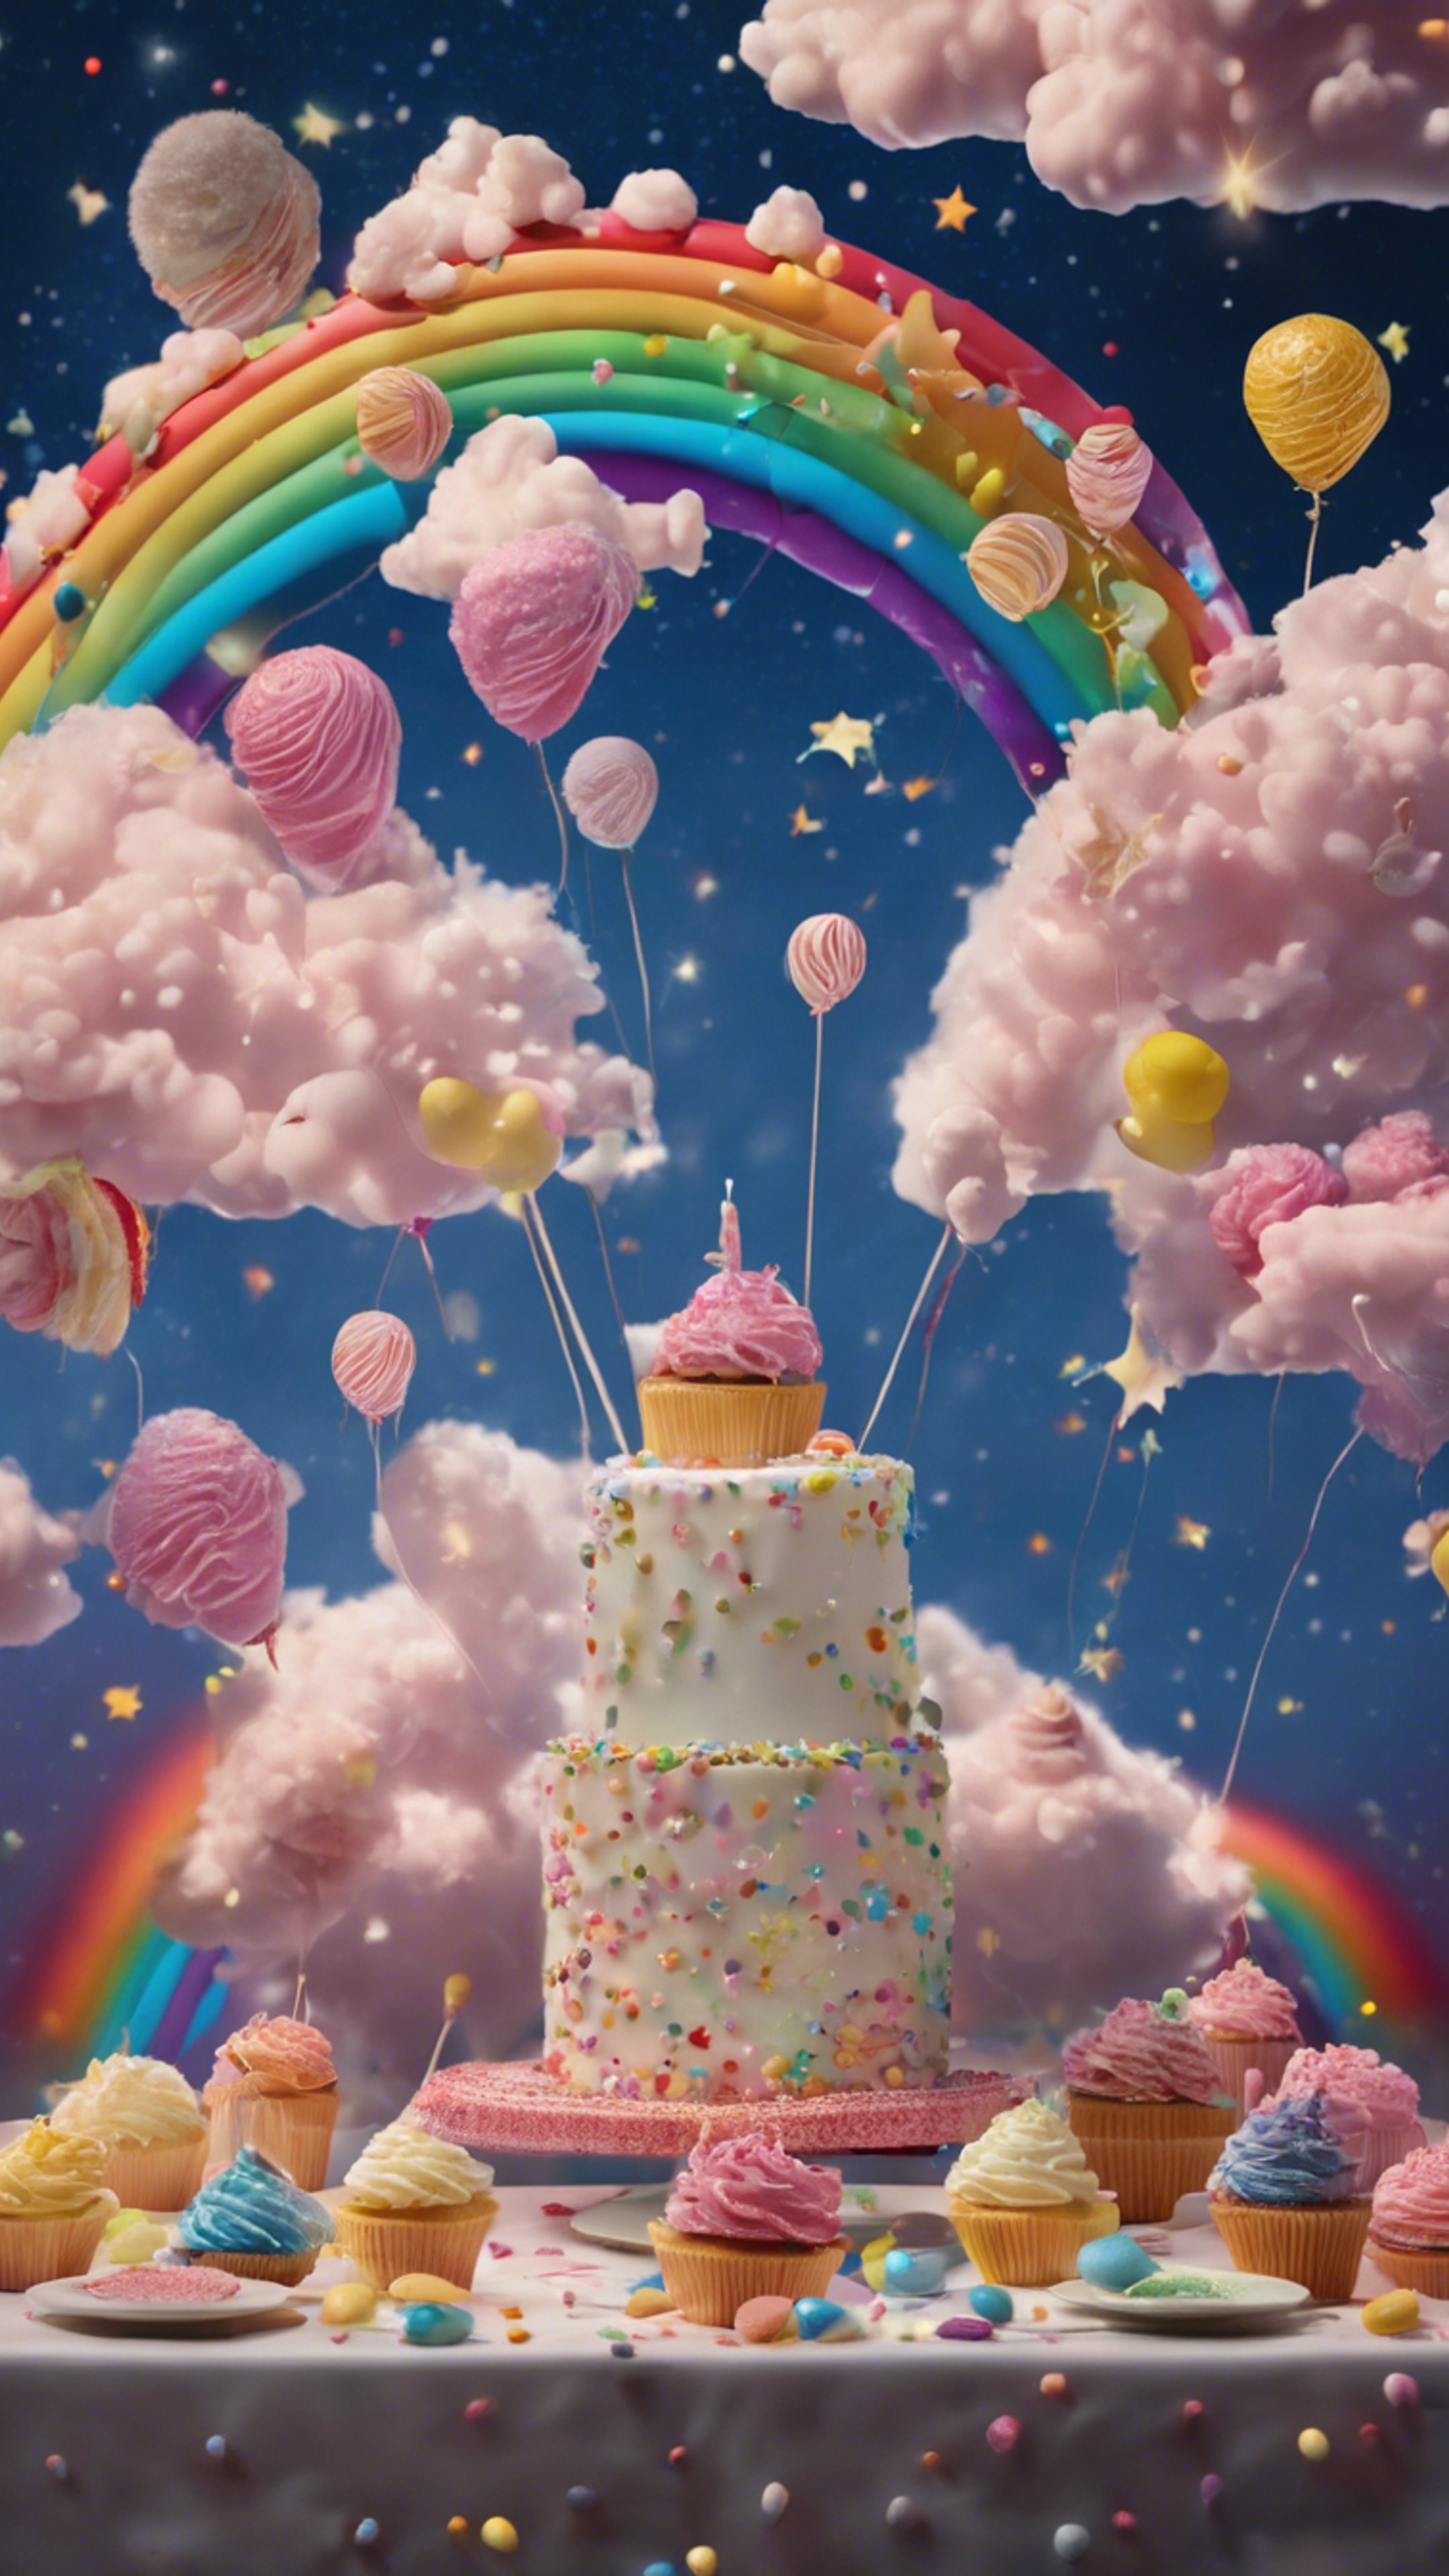 Surreal representation of a birthday party with floating cakes, candies amid fluffy clouds and rainbows discordantly juxtaposed against a starry night sky. duvar kağıdı[7f18c2fd7760424e83fc]